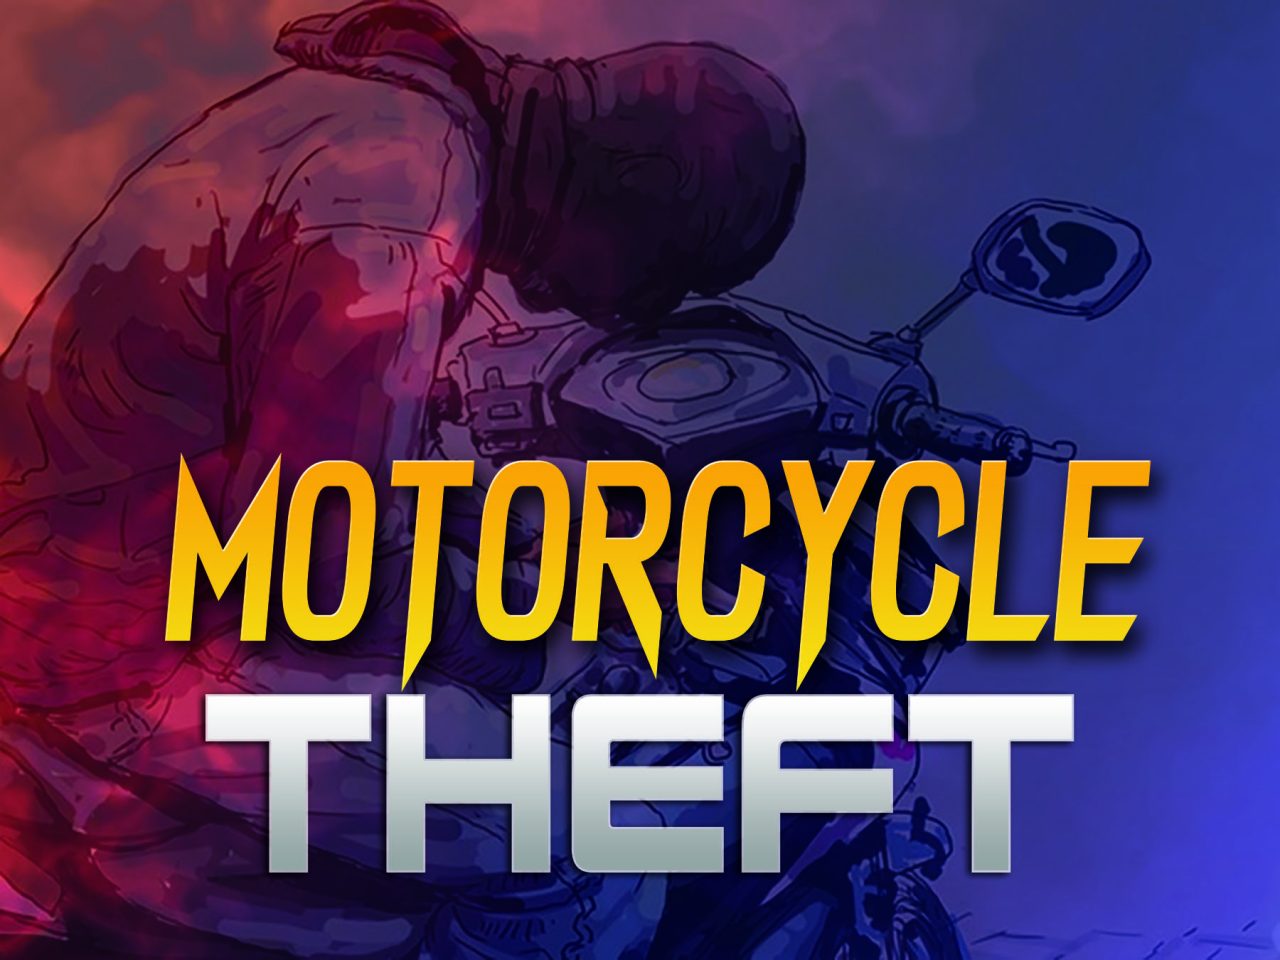 Gunmen steal a motorcycle at traffic lights